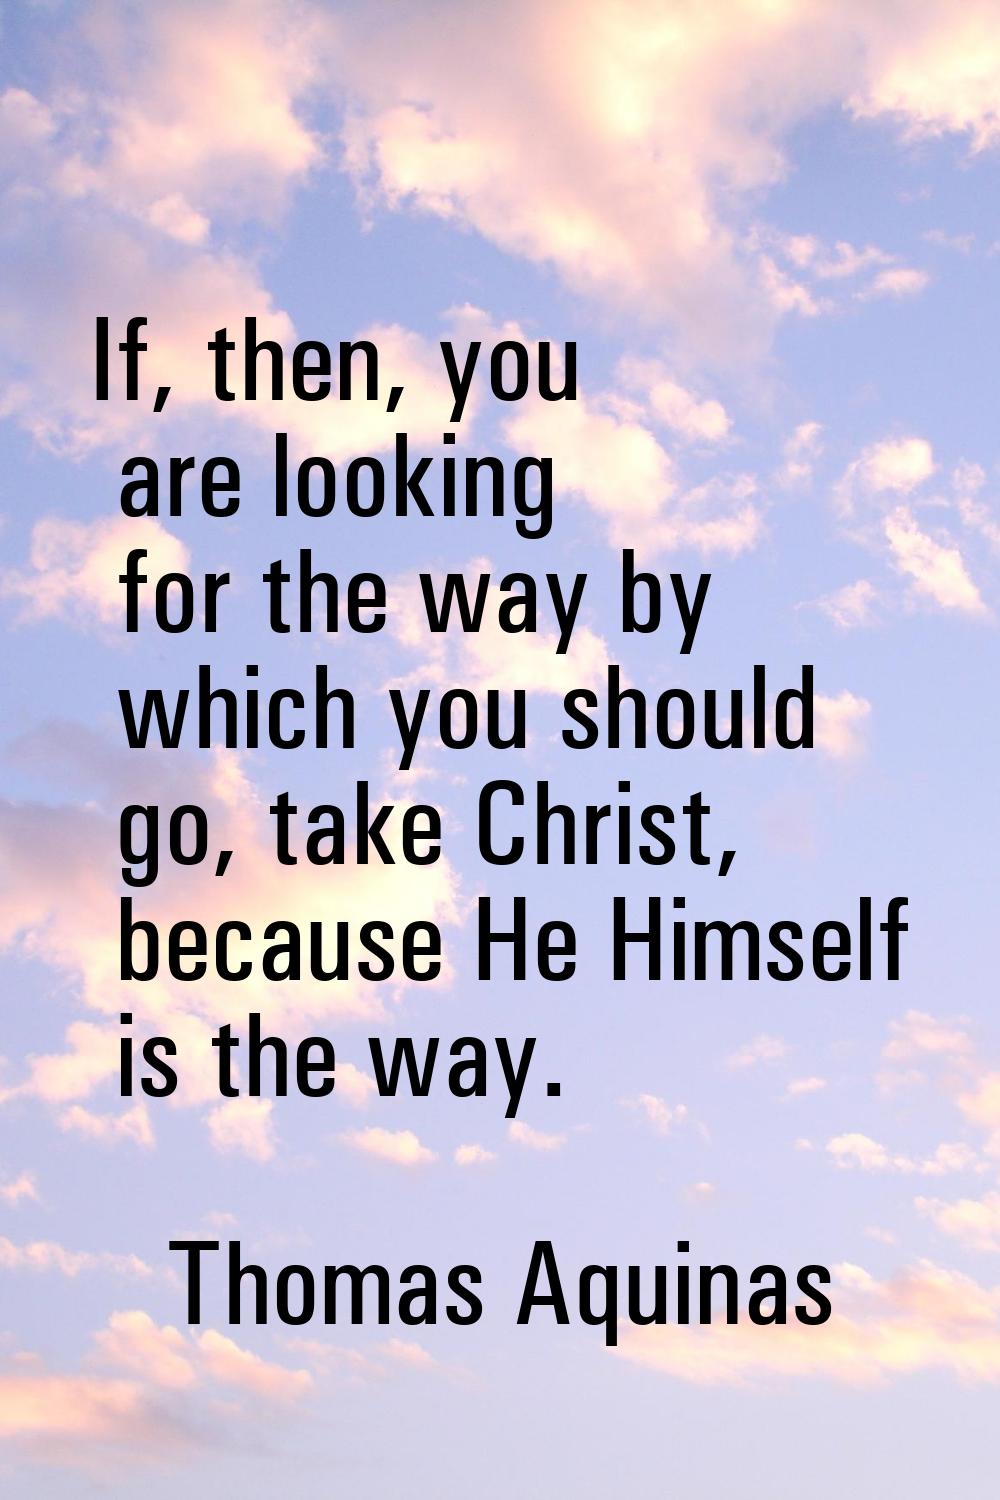 If, then, you are looking for the way by which you should go, take Christ, because He Himself is th